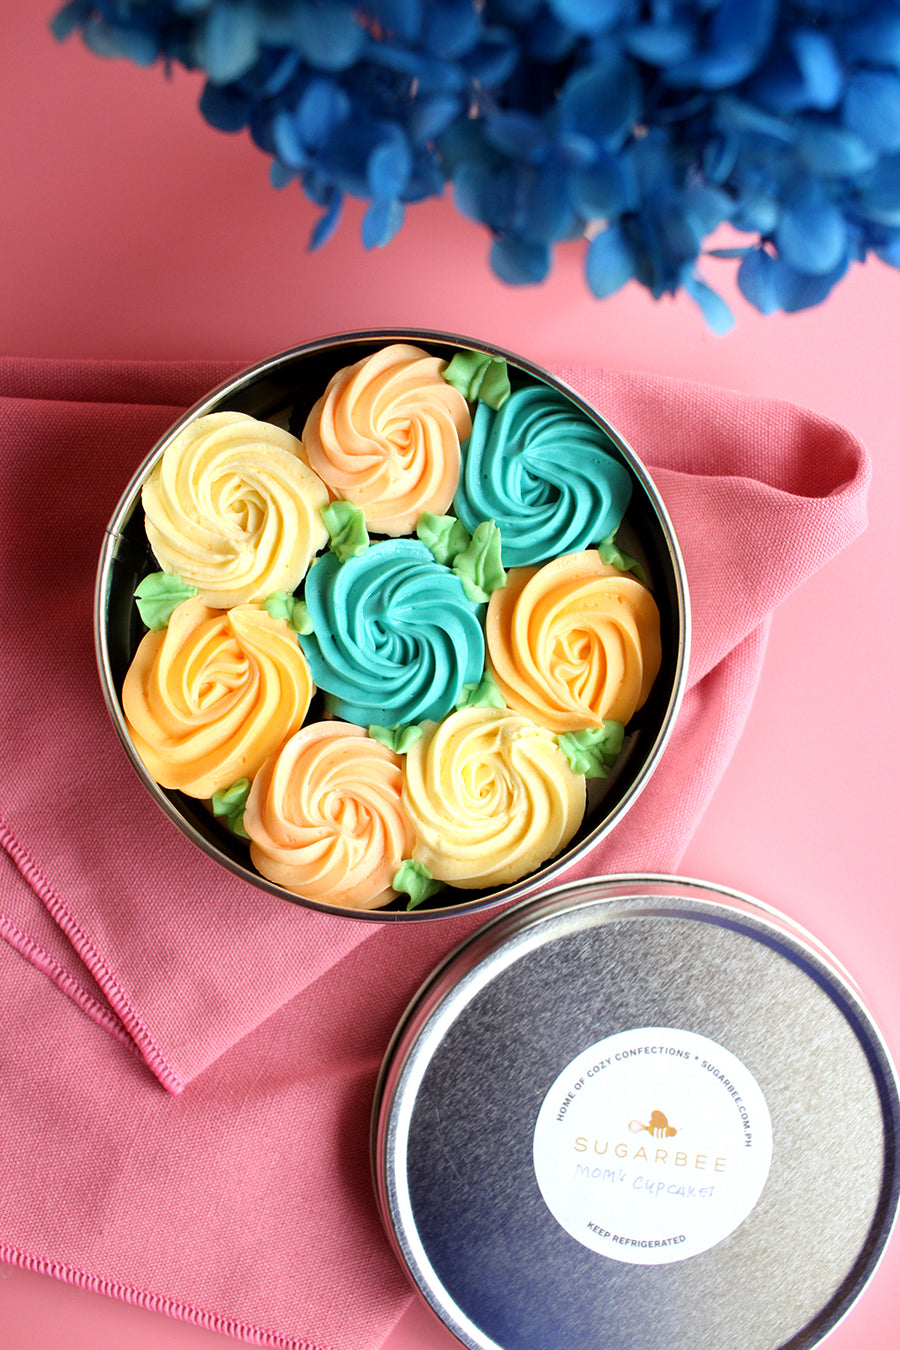 Florette Chocolate Cupcakes with Buttercream Frosting (Mini Cupcakes)